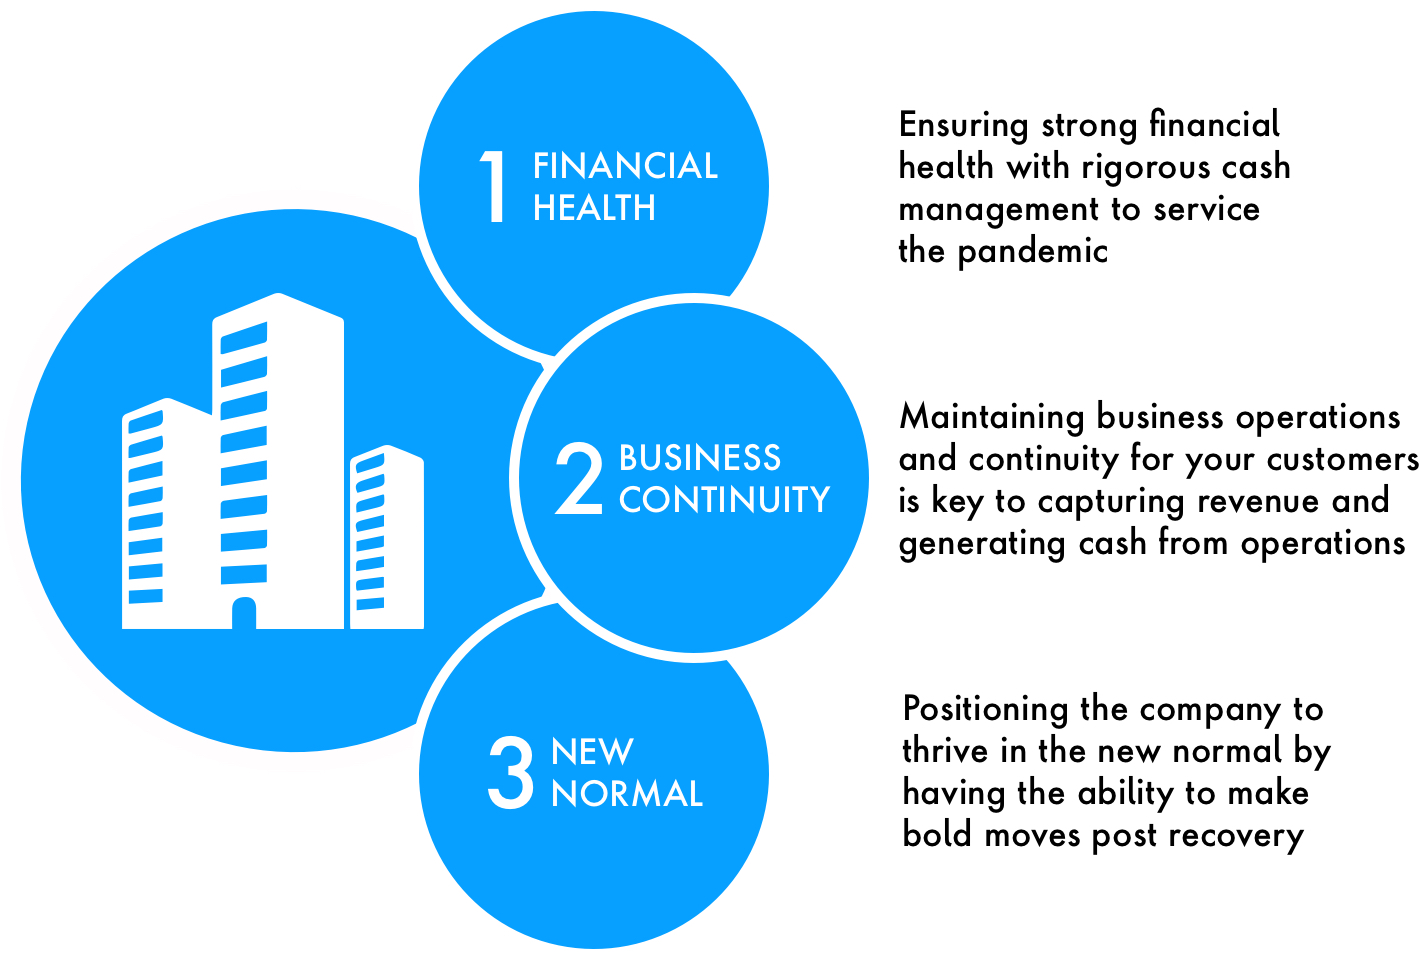 financial health, business continuity, new normal